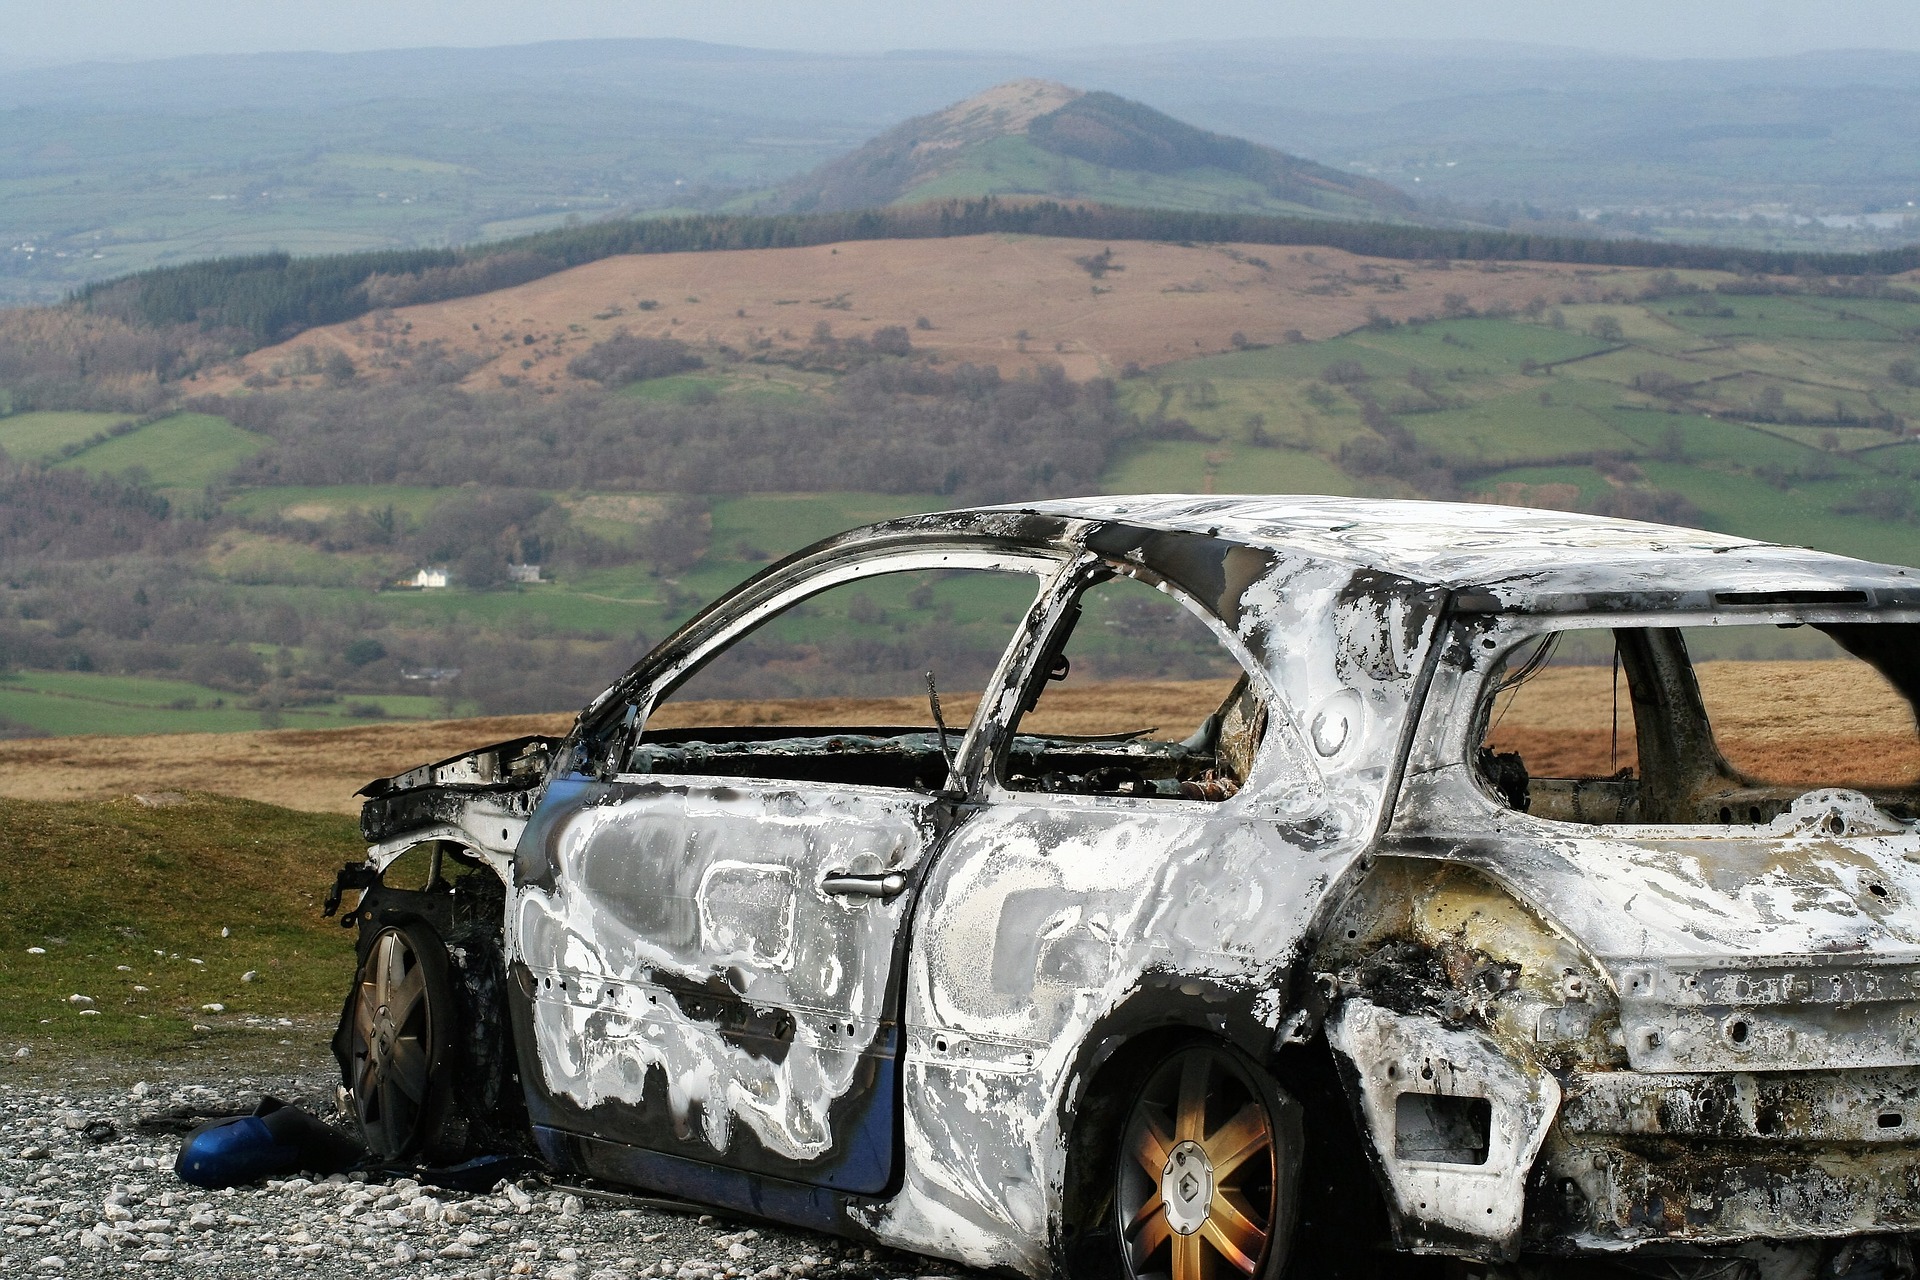 A burnt car, not from the story, stands in a field on a hillside with larger hills and mountains in the background.